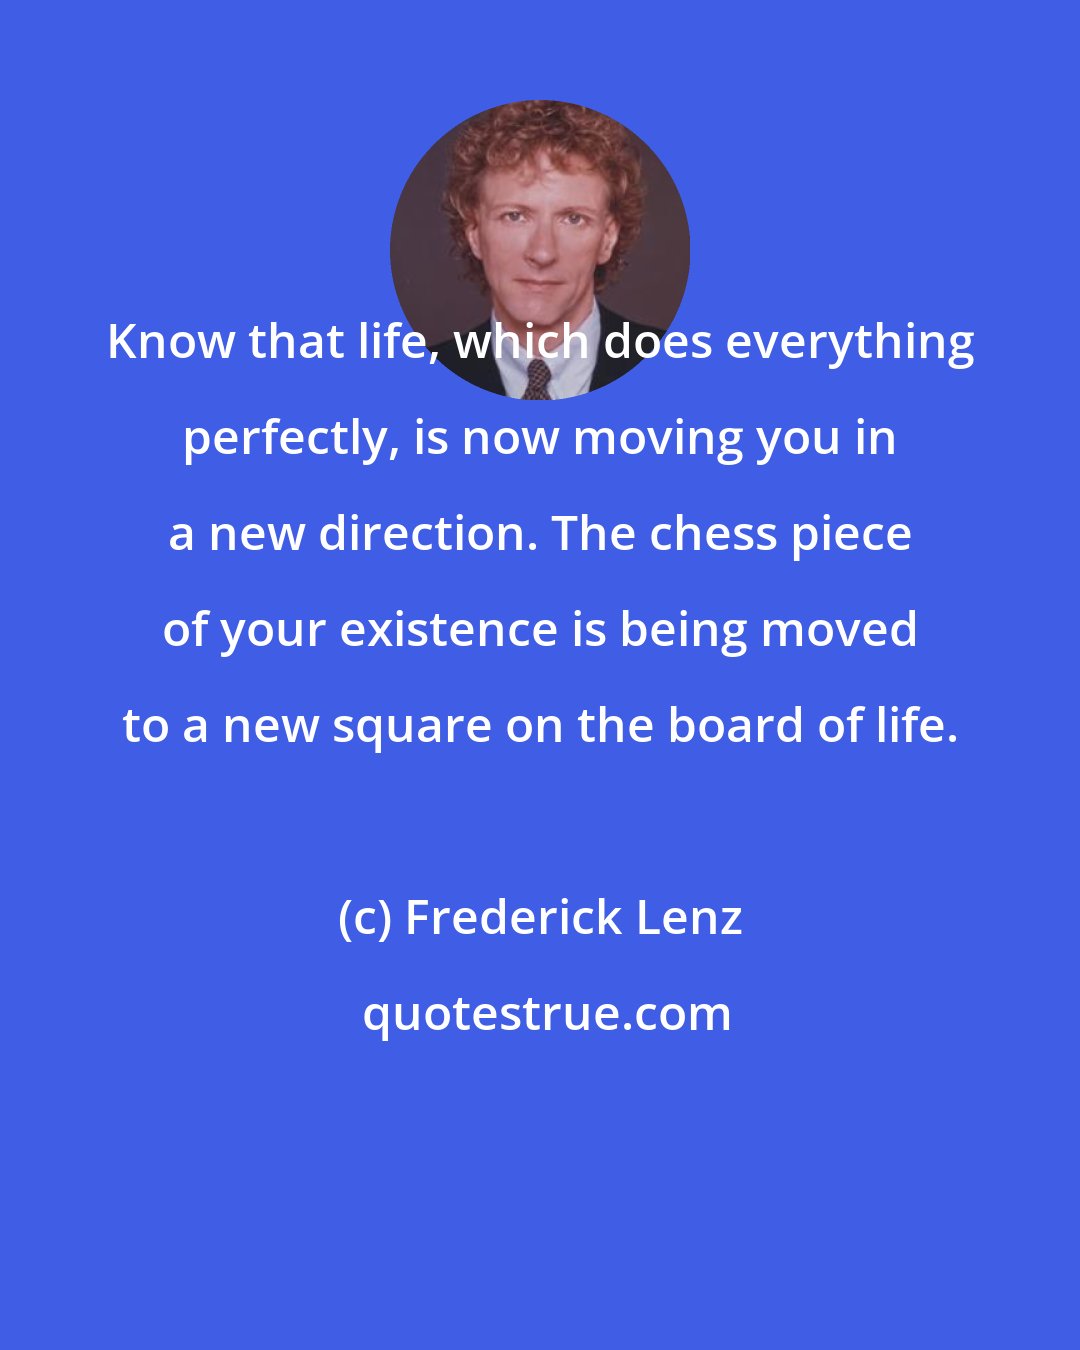 Frederick Lenz: Know that life, which does everything perfectly, is now moving you in a new direction. The chess piece of your existence is being moved to a new square on the board of life.